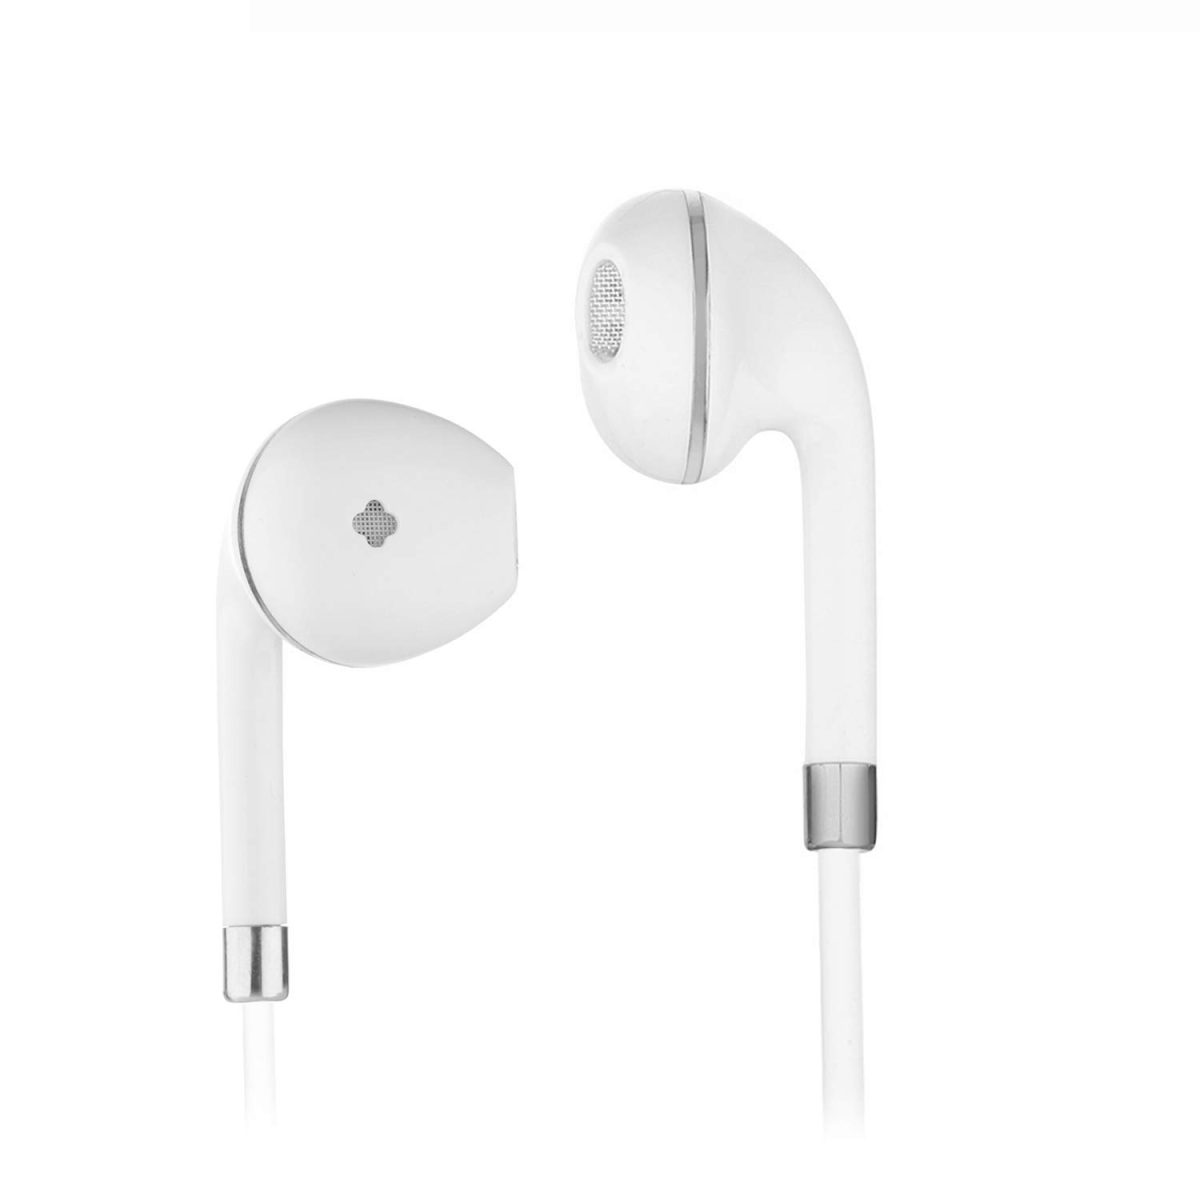 Souvenir Universal Wired 2in1 Earphones with Mic (White)